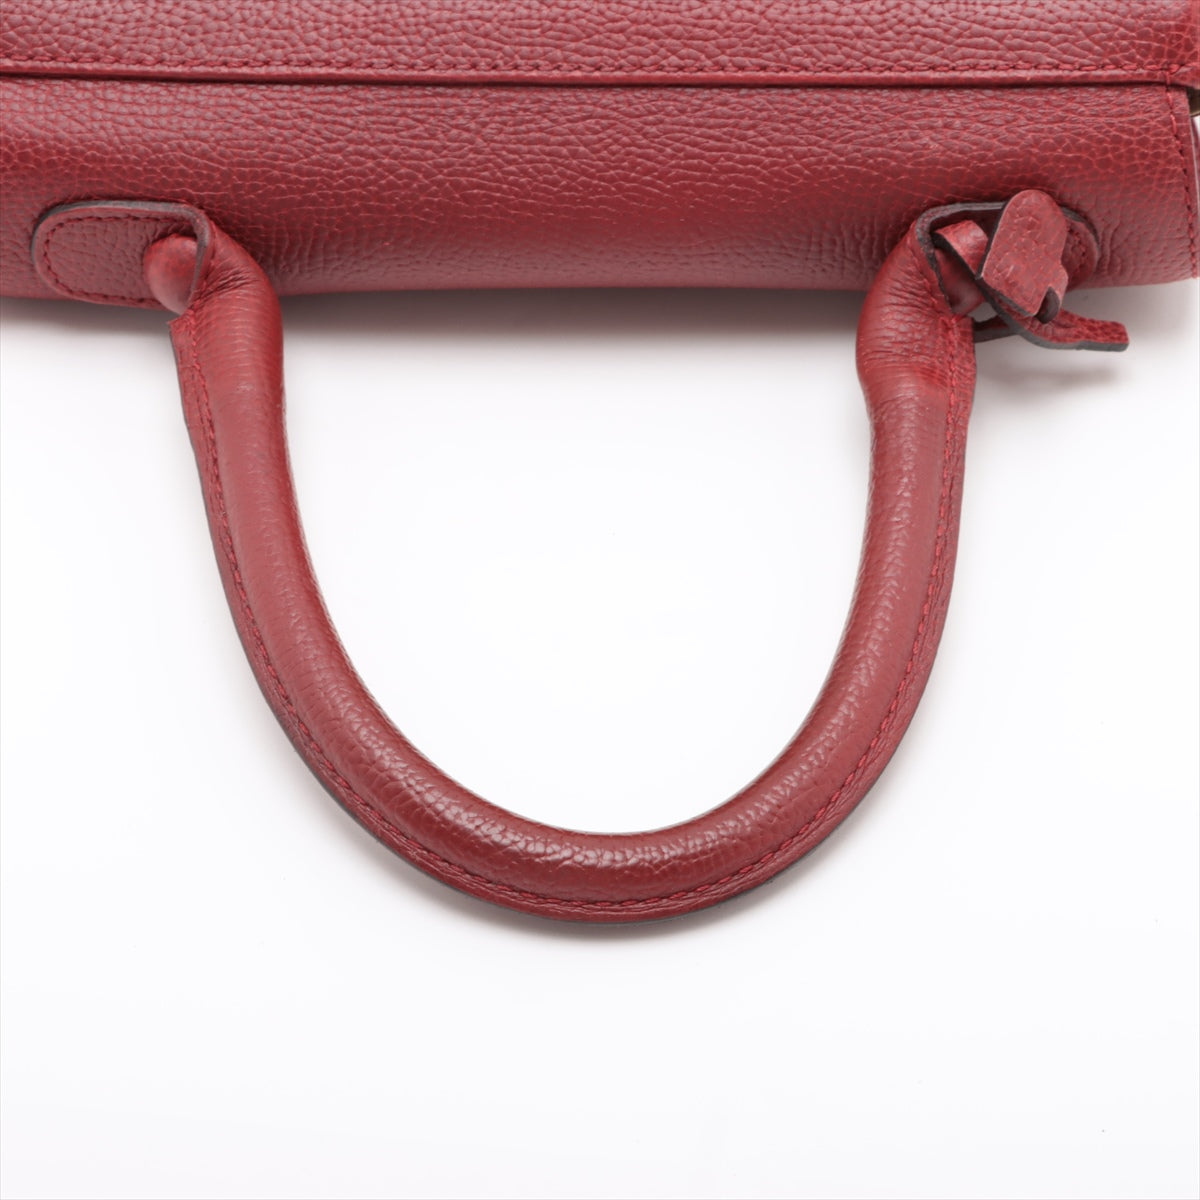 DELVAUX Brillant Leather Hand bag Red